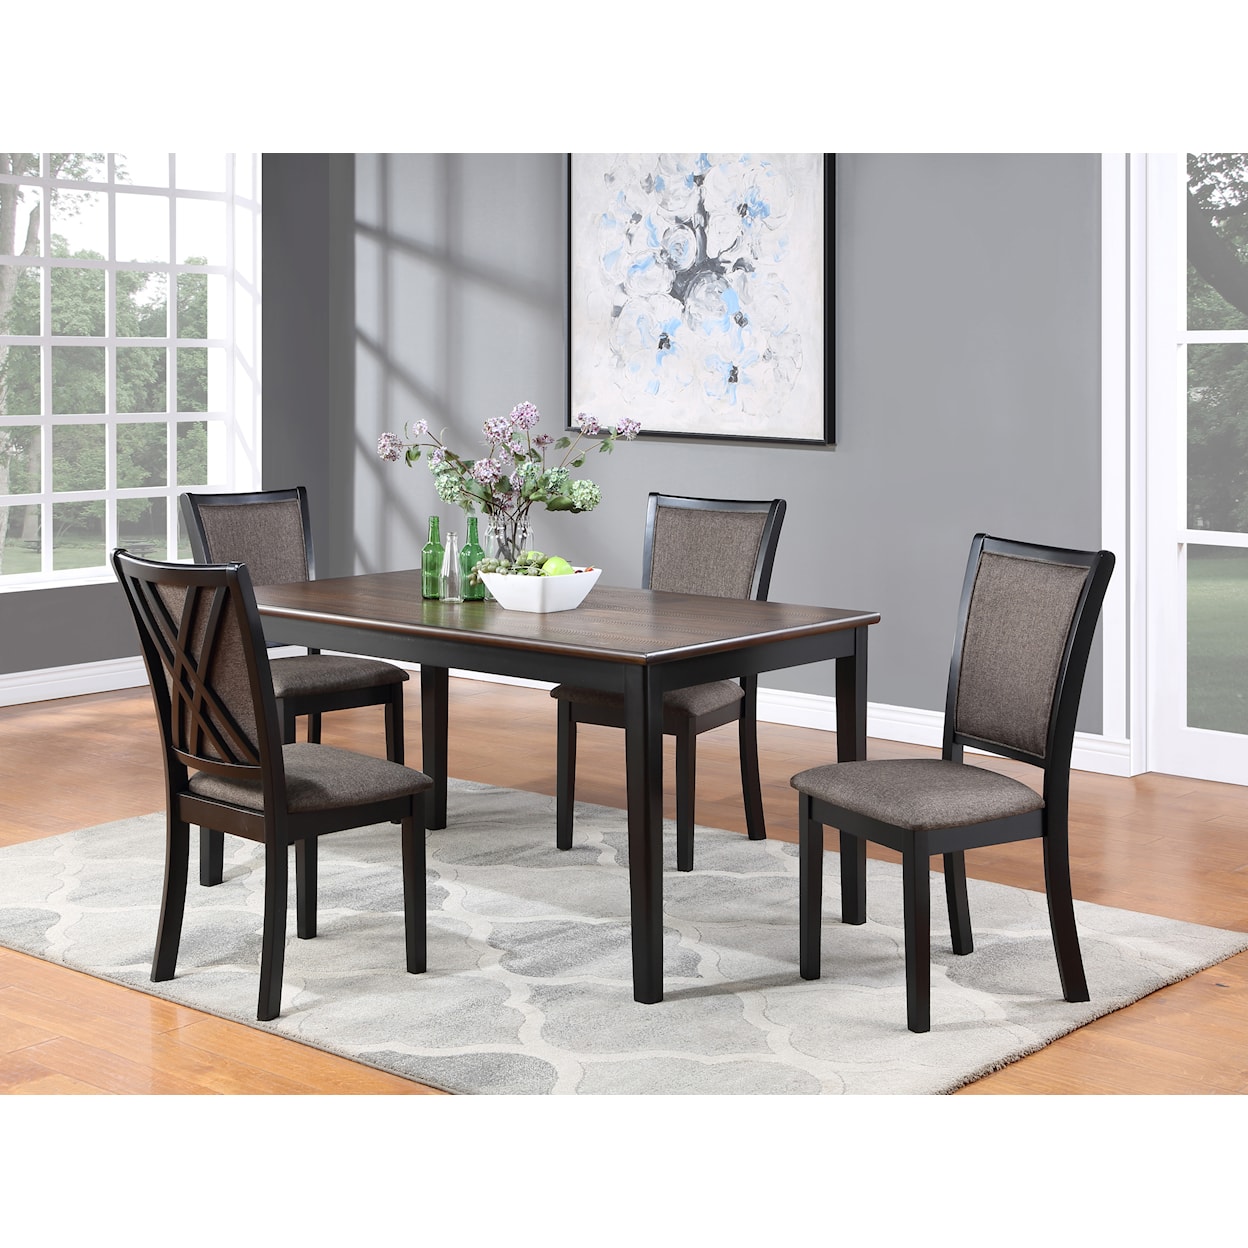 New Classic Furniture Potomac Dining Chair